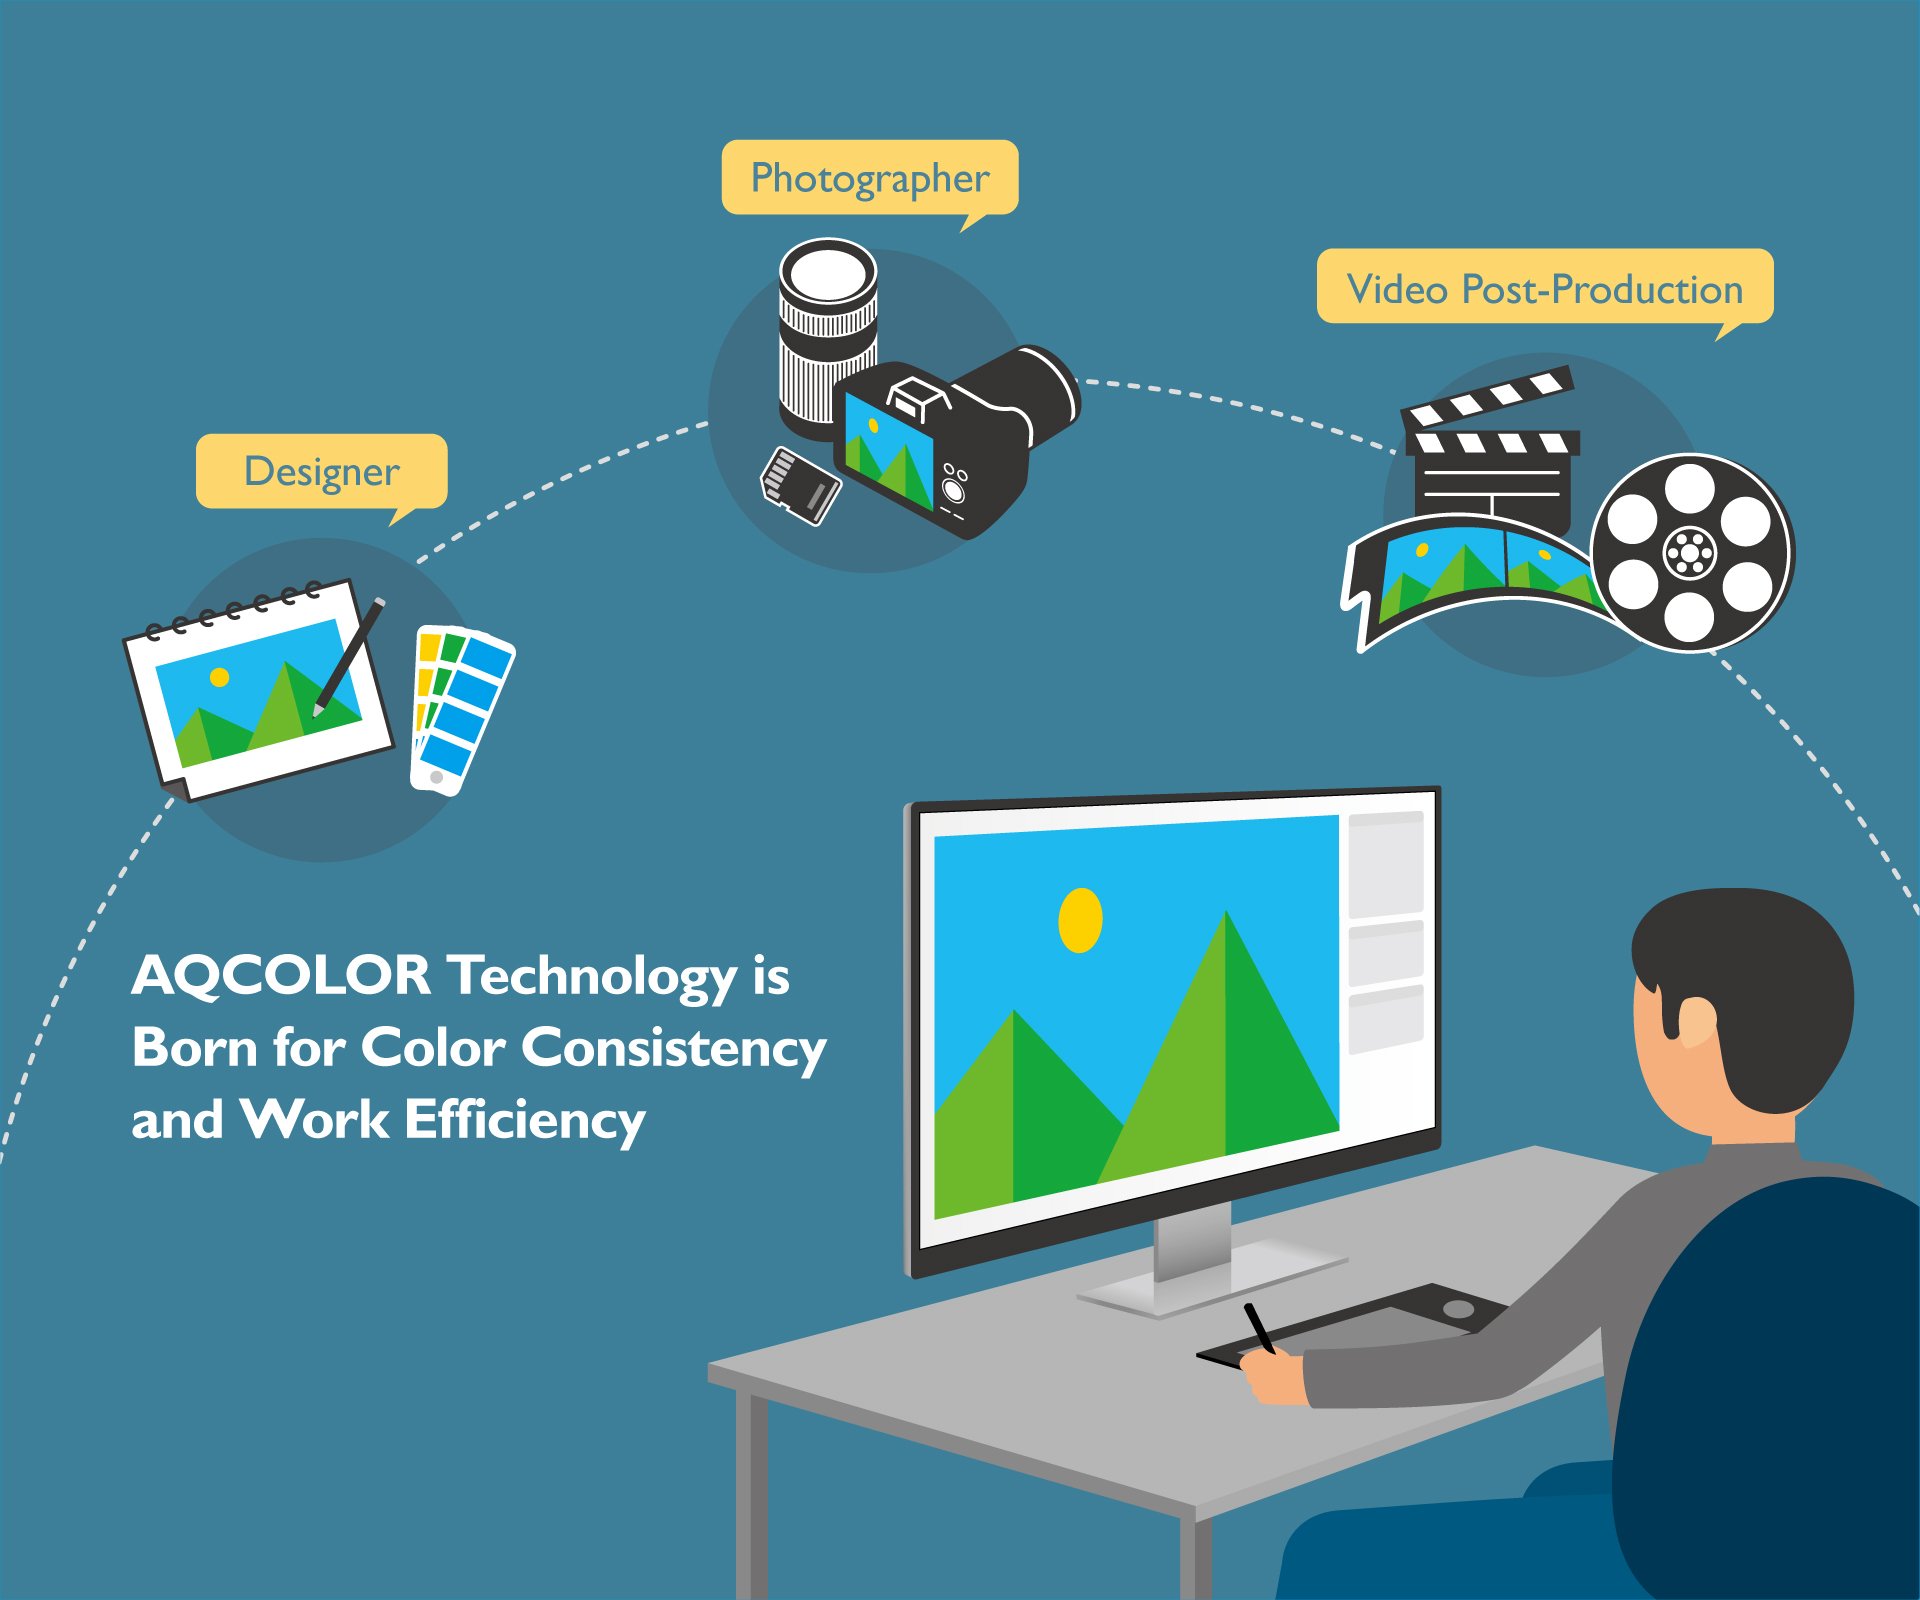 AQCOLOR technology provides the color accuracy, consistency and work efficiency for designer, photographer and professional related to video post-production.